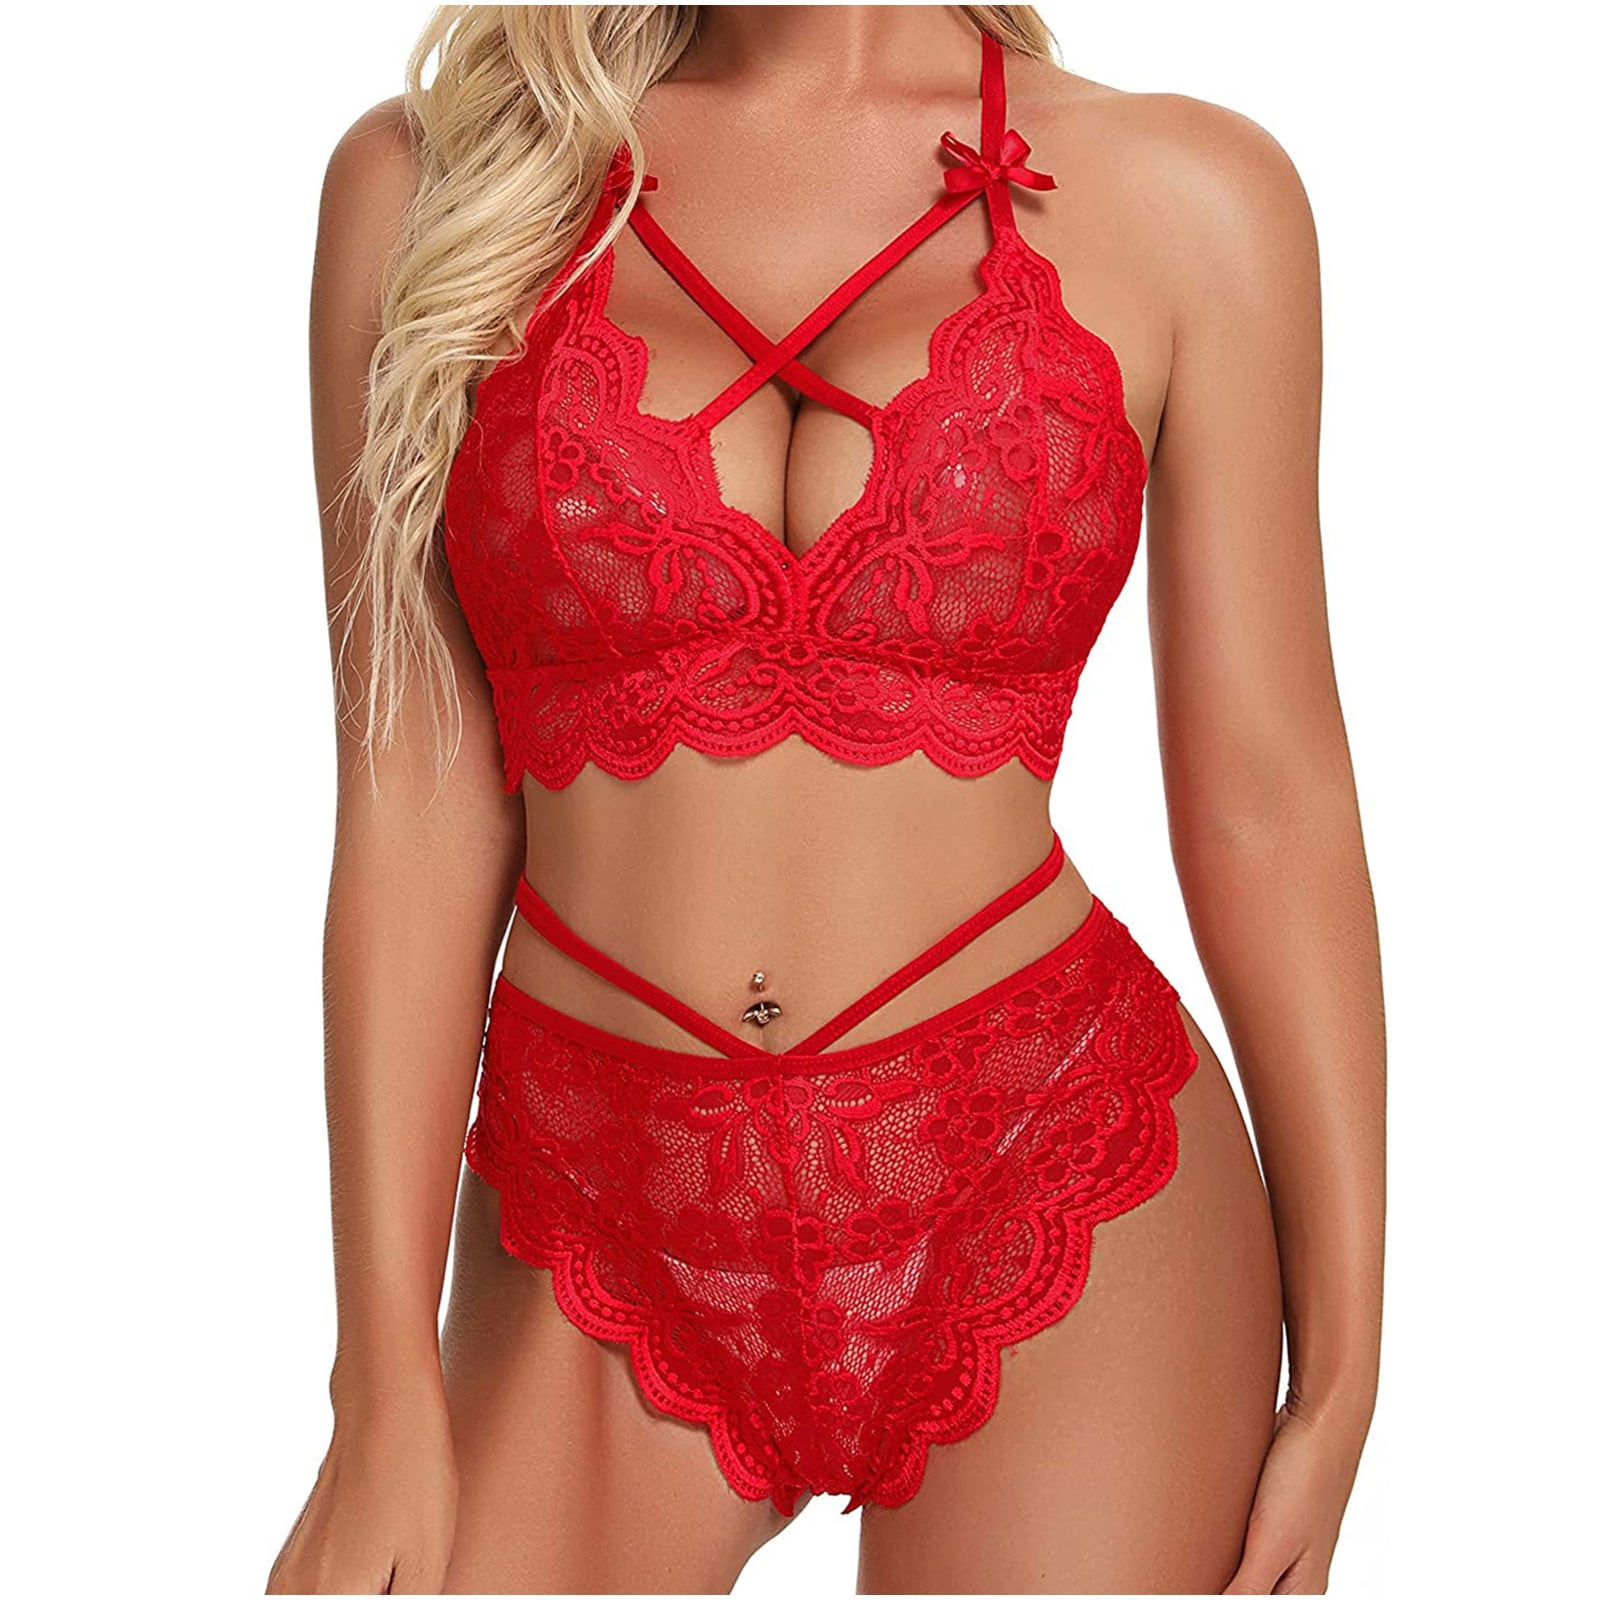 Sex Lingerie Naughty 3 Piece Lace Exotic Lingerie Sets Two Piece Lace Bra And Panty Set Open Cup